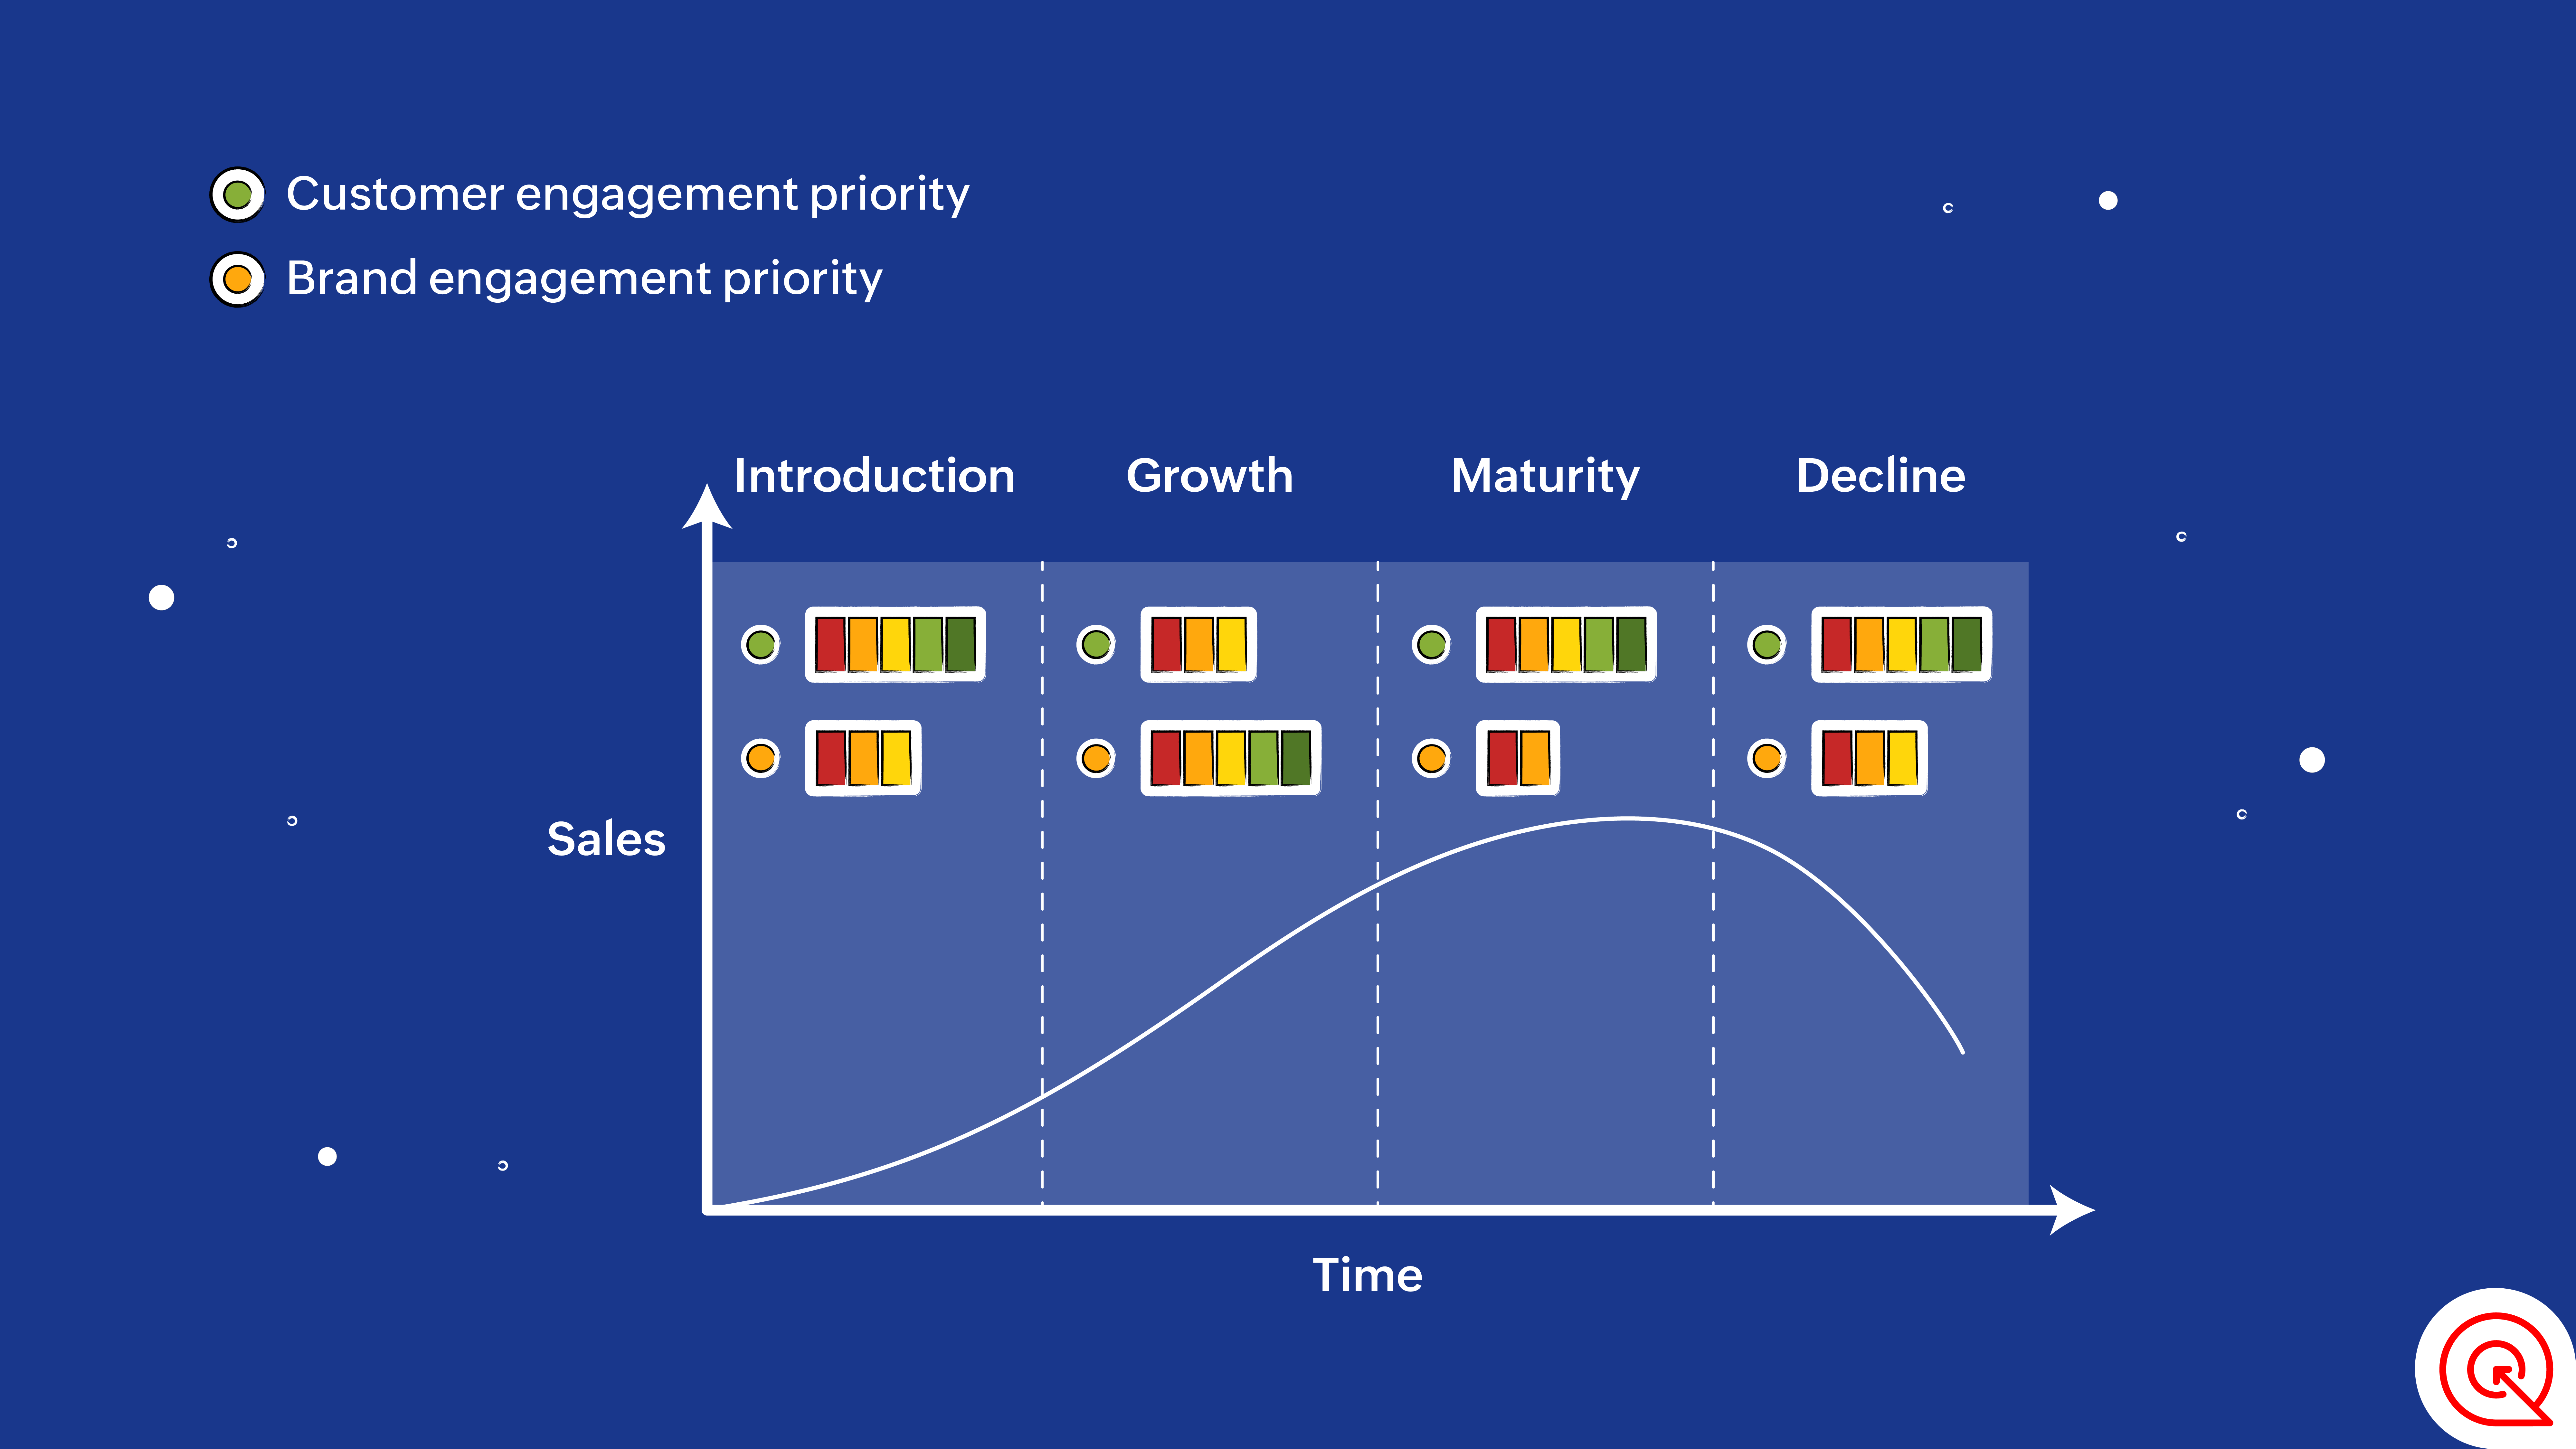 Brand engagement vs Customer engagement - Product Life Cycle (PLC)